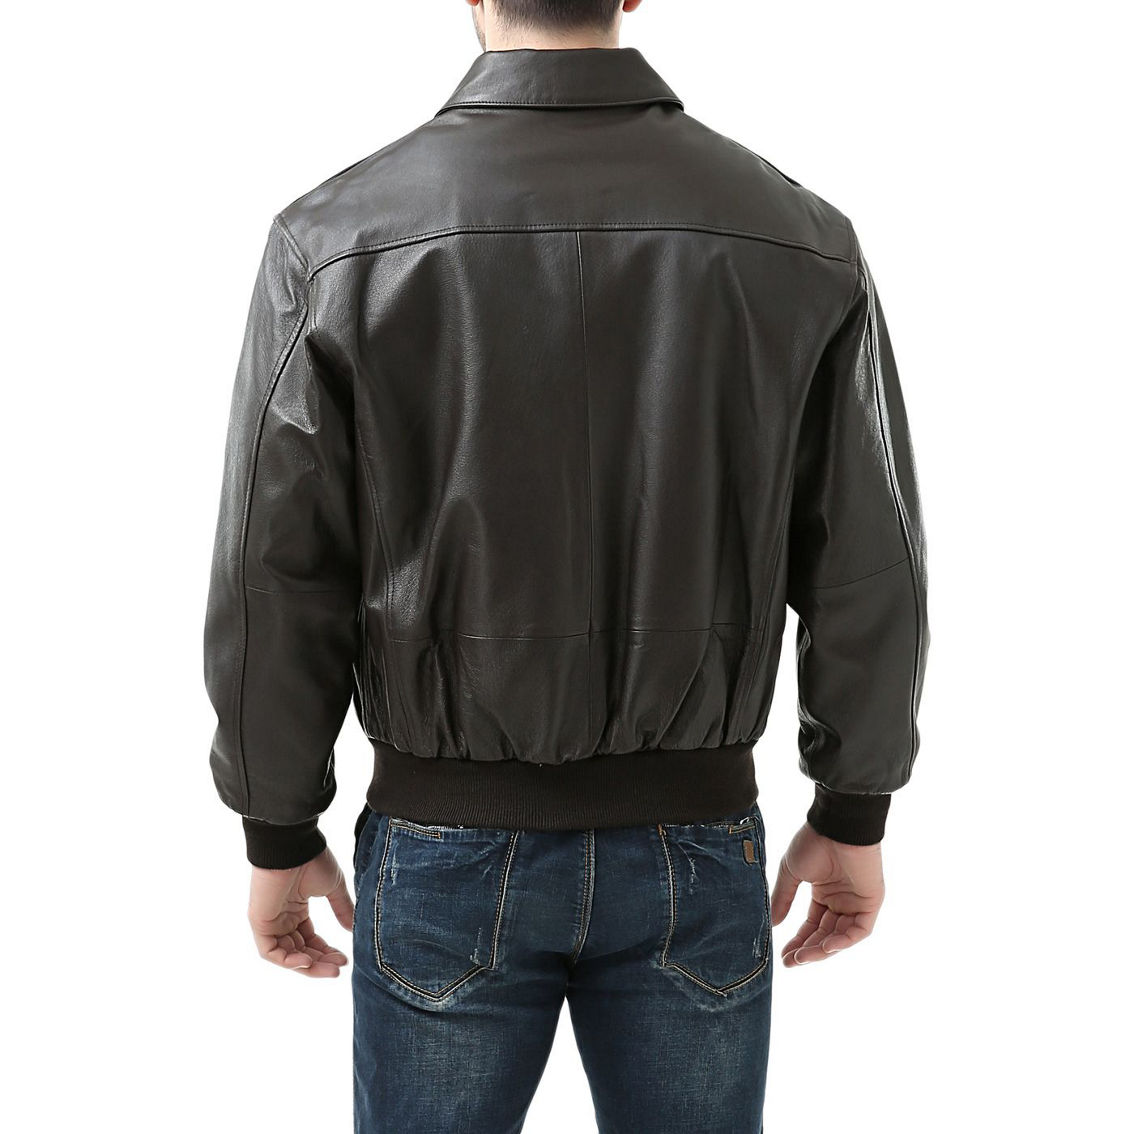 Landing Leathers Men Air Force A-2 Leather Flight Bomber Jacket - Regular & Tall - Image 5 of 5